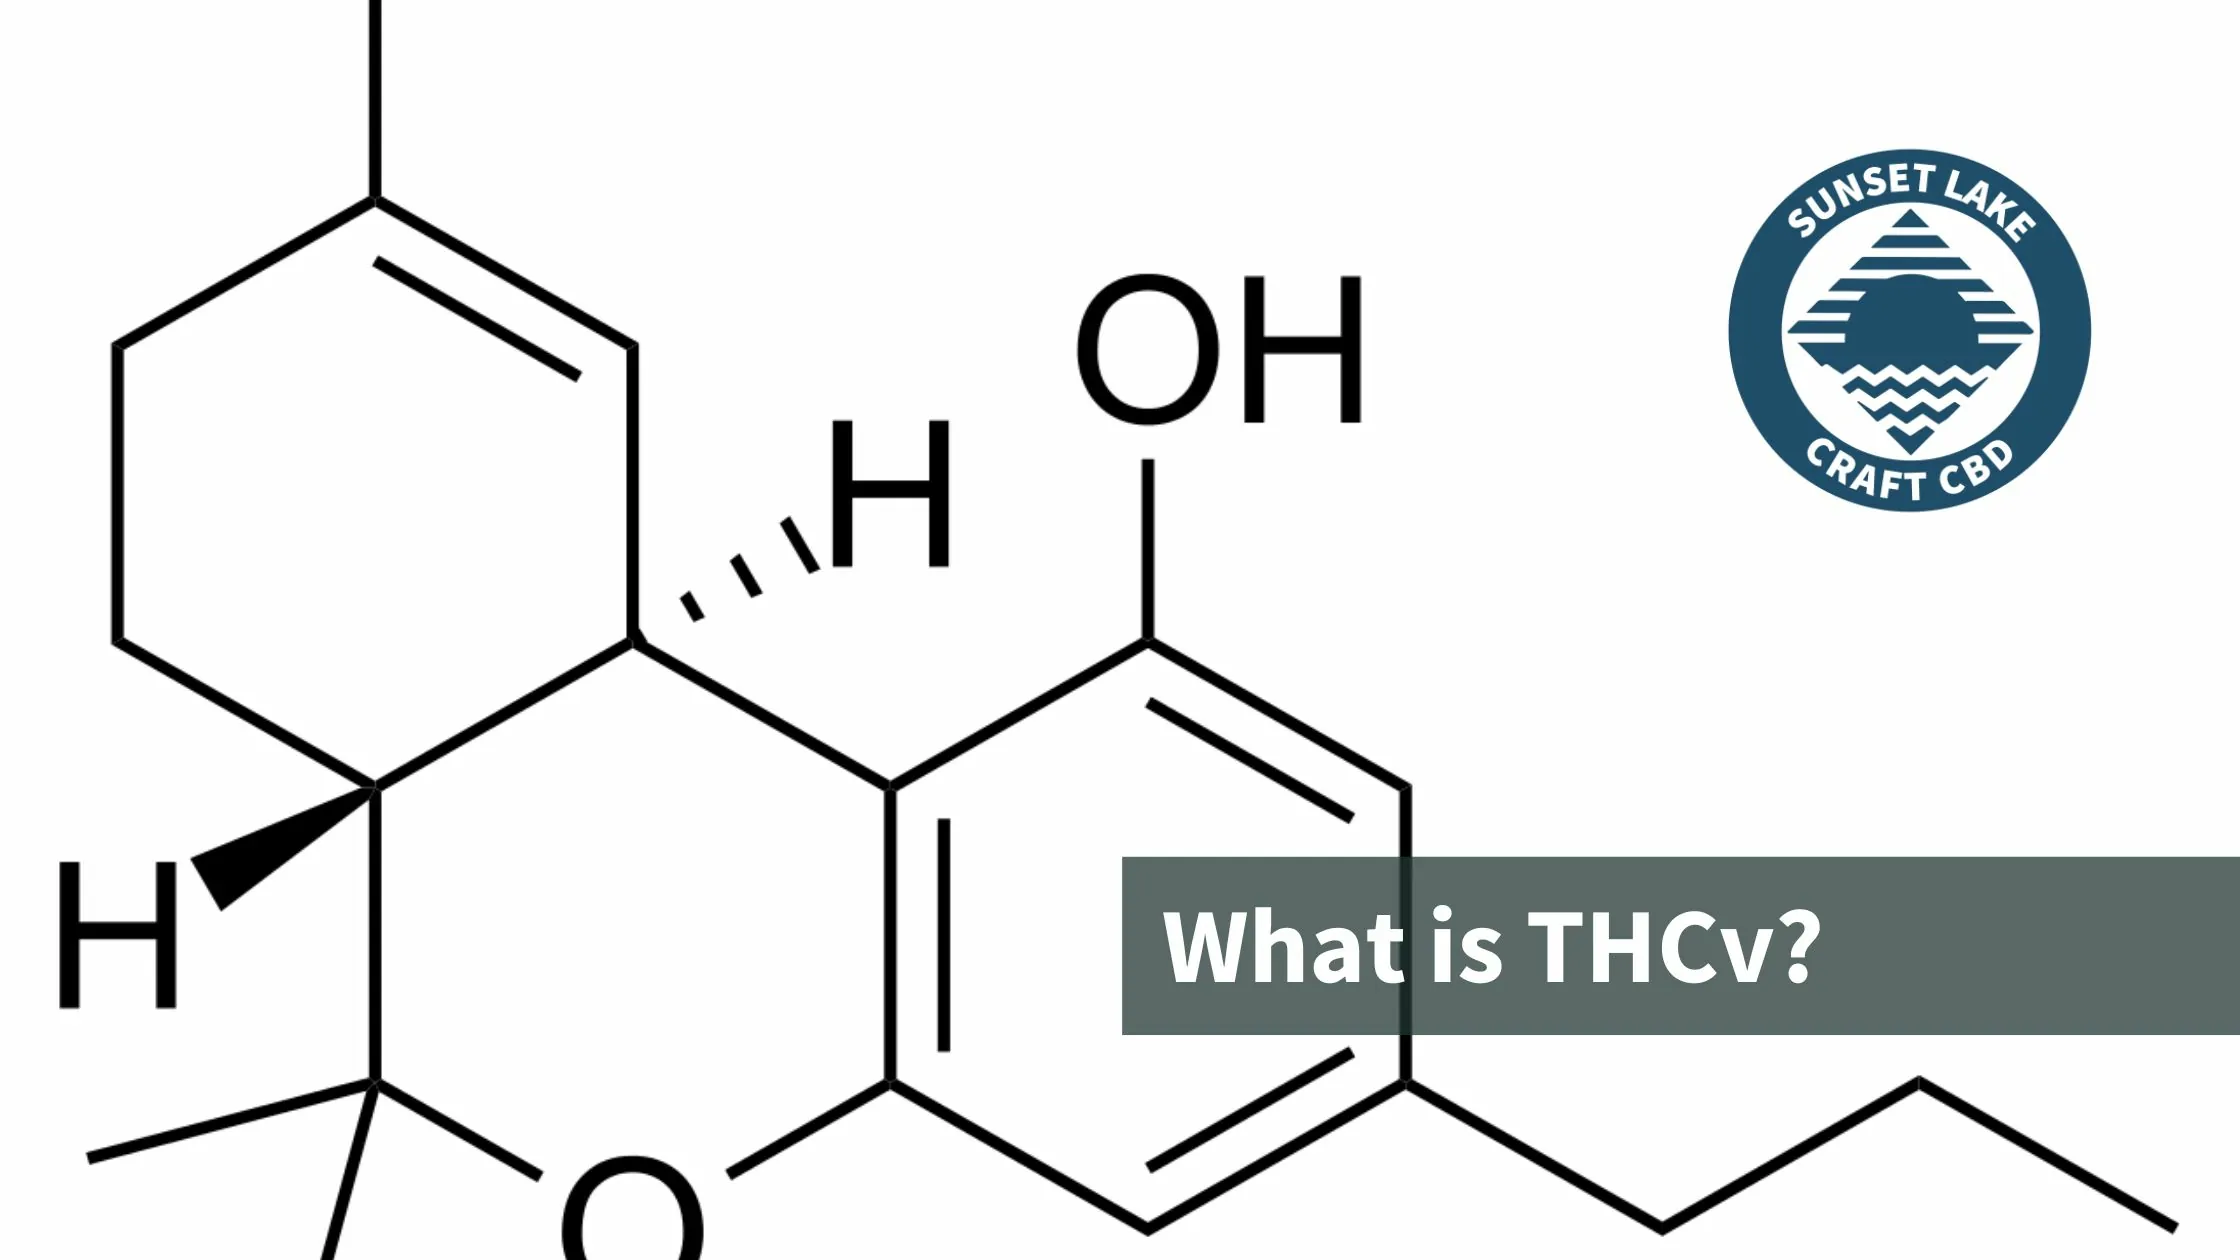 What Is THCV & What Is It Used For?